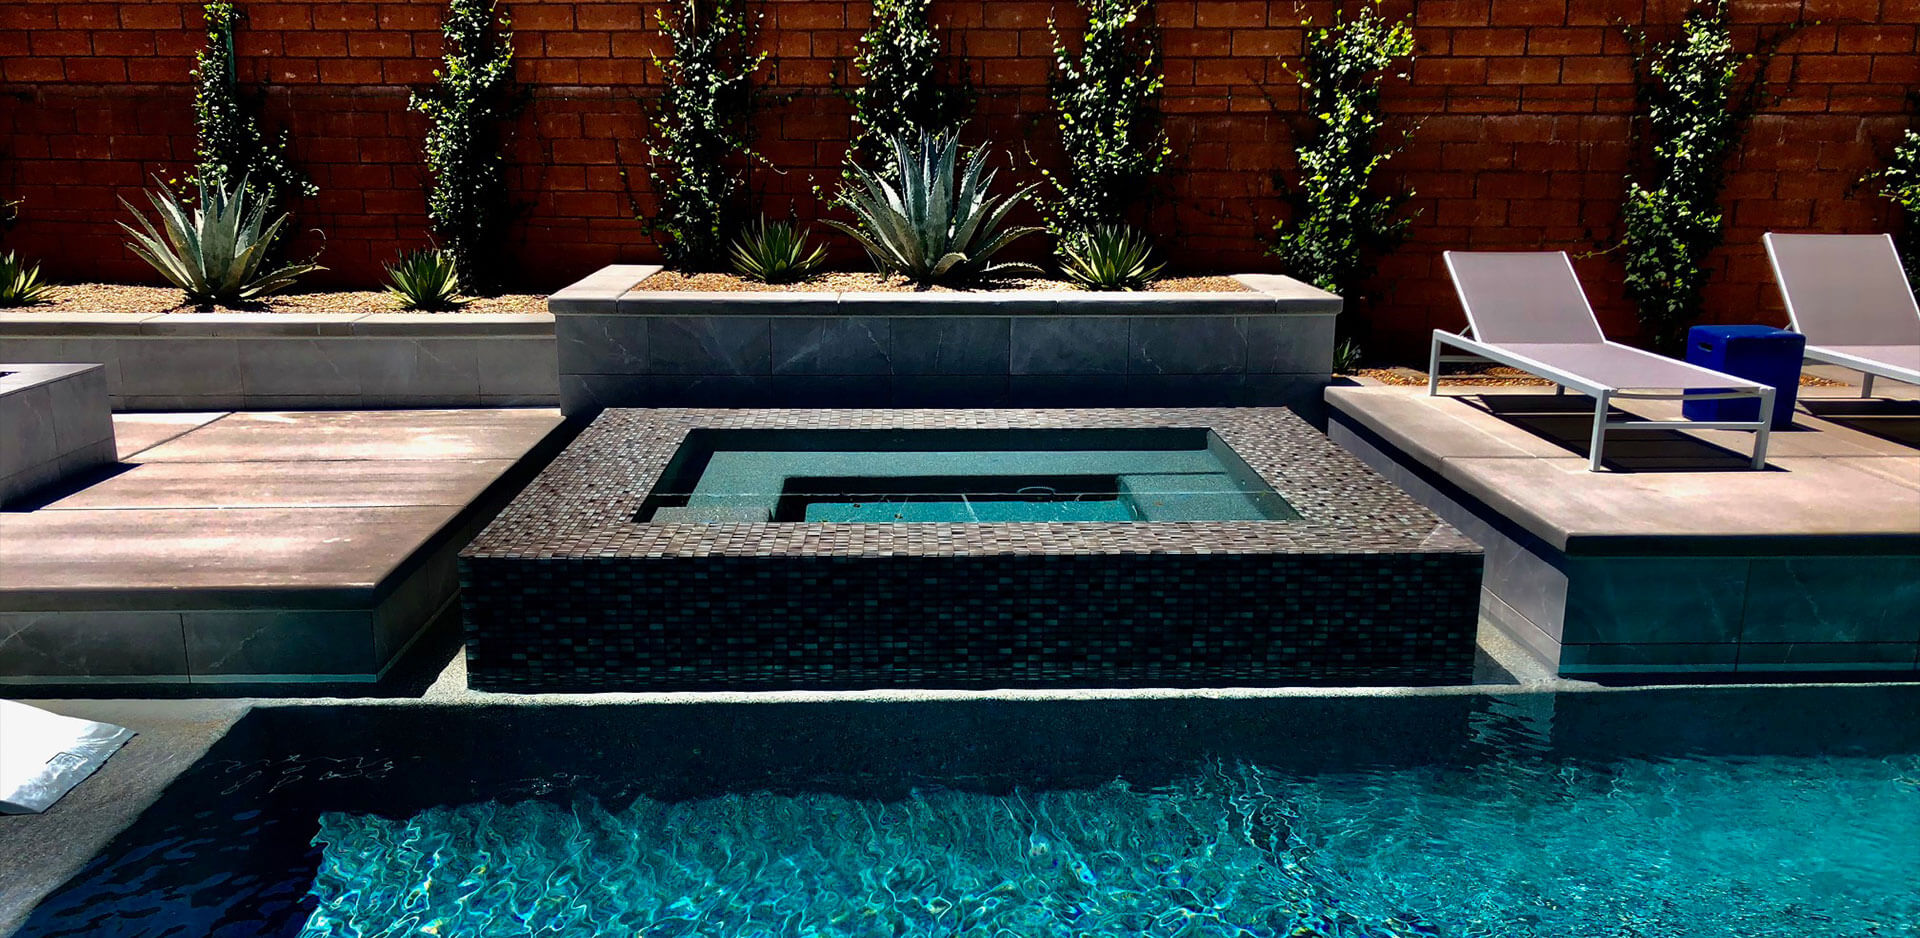 A pool with a stone bench and water feature.